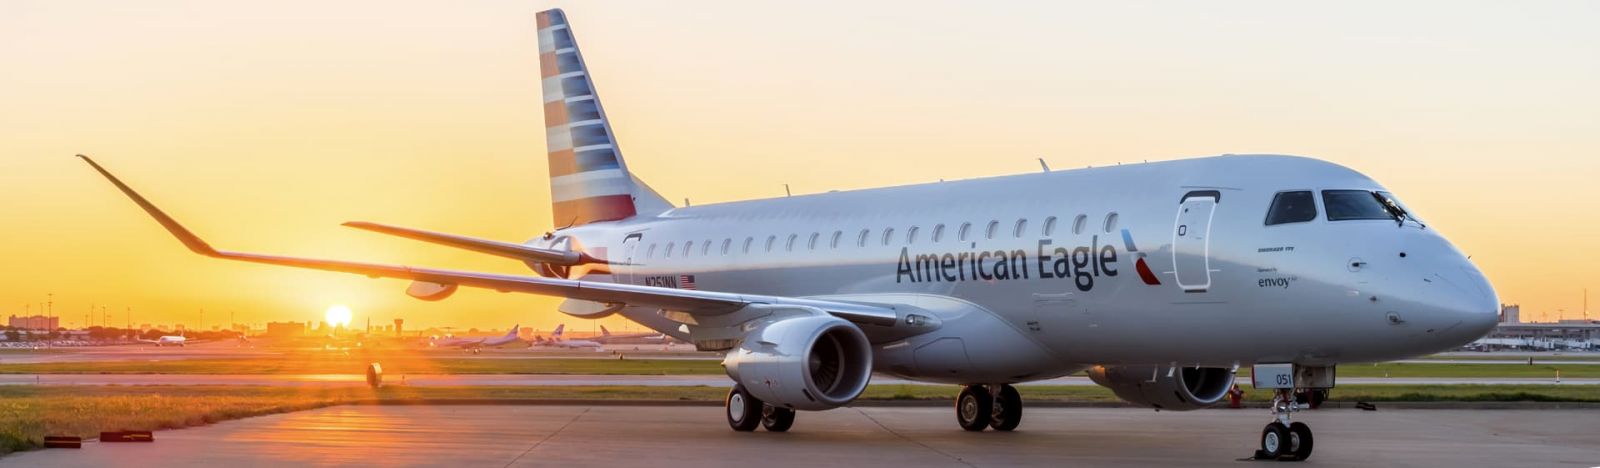 An American Eagle Embraer 175 aircraft operated by Envoy Air will be on display at Purdue Aviation Day. (Photo provided)